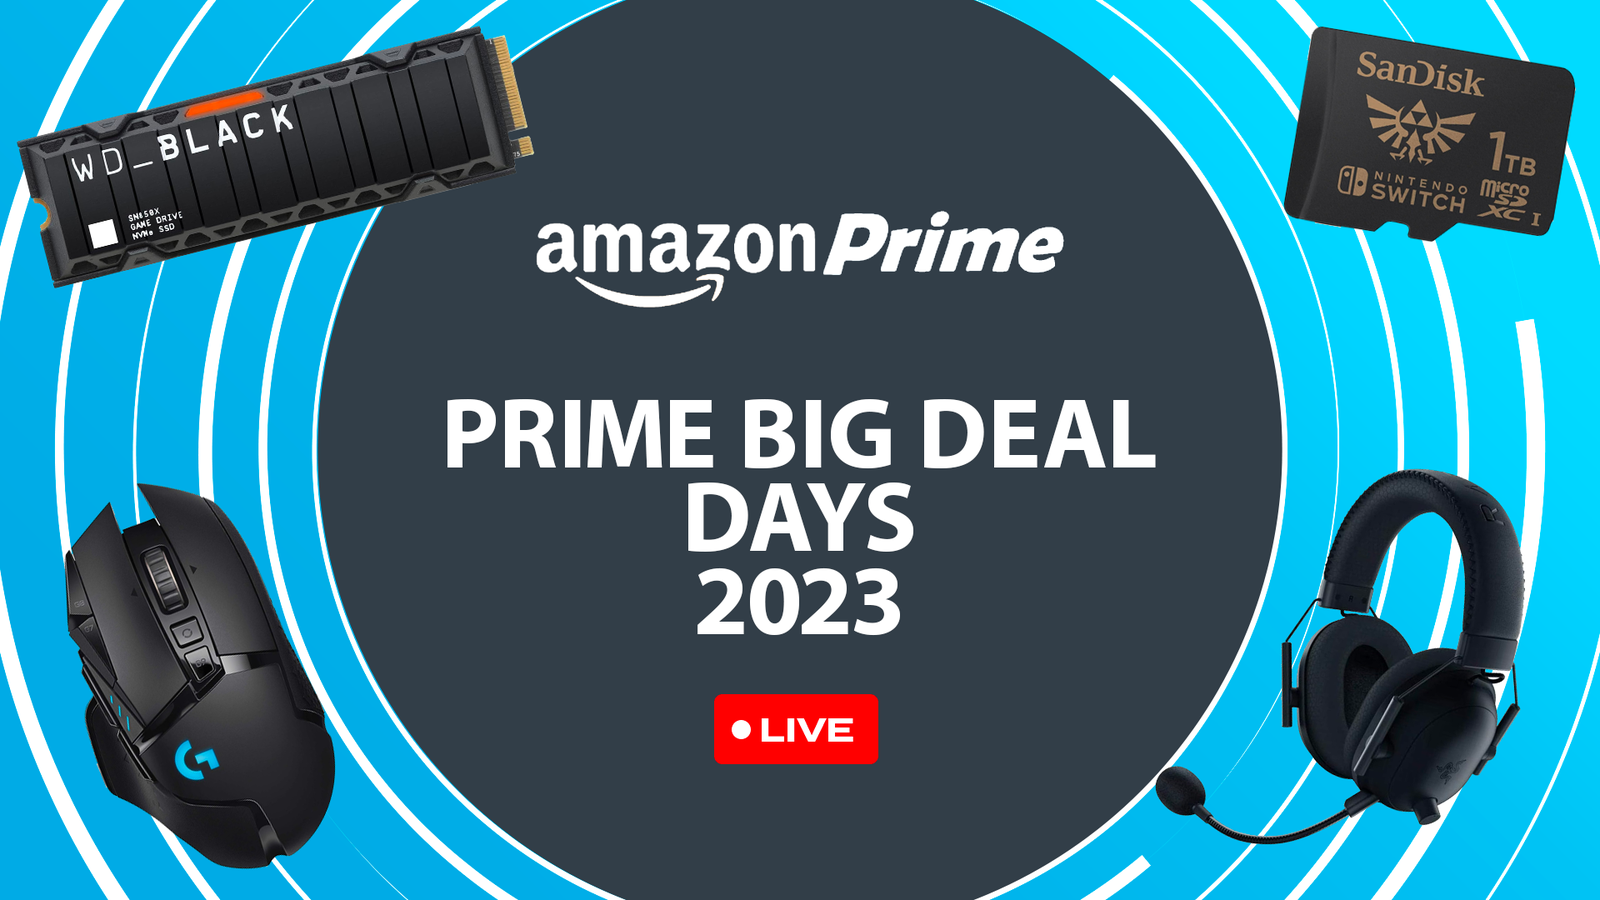 The  Prime Big Deal Days help you save big on the tech you